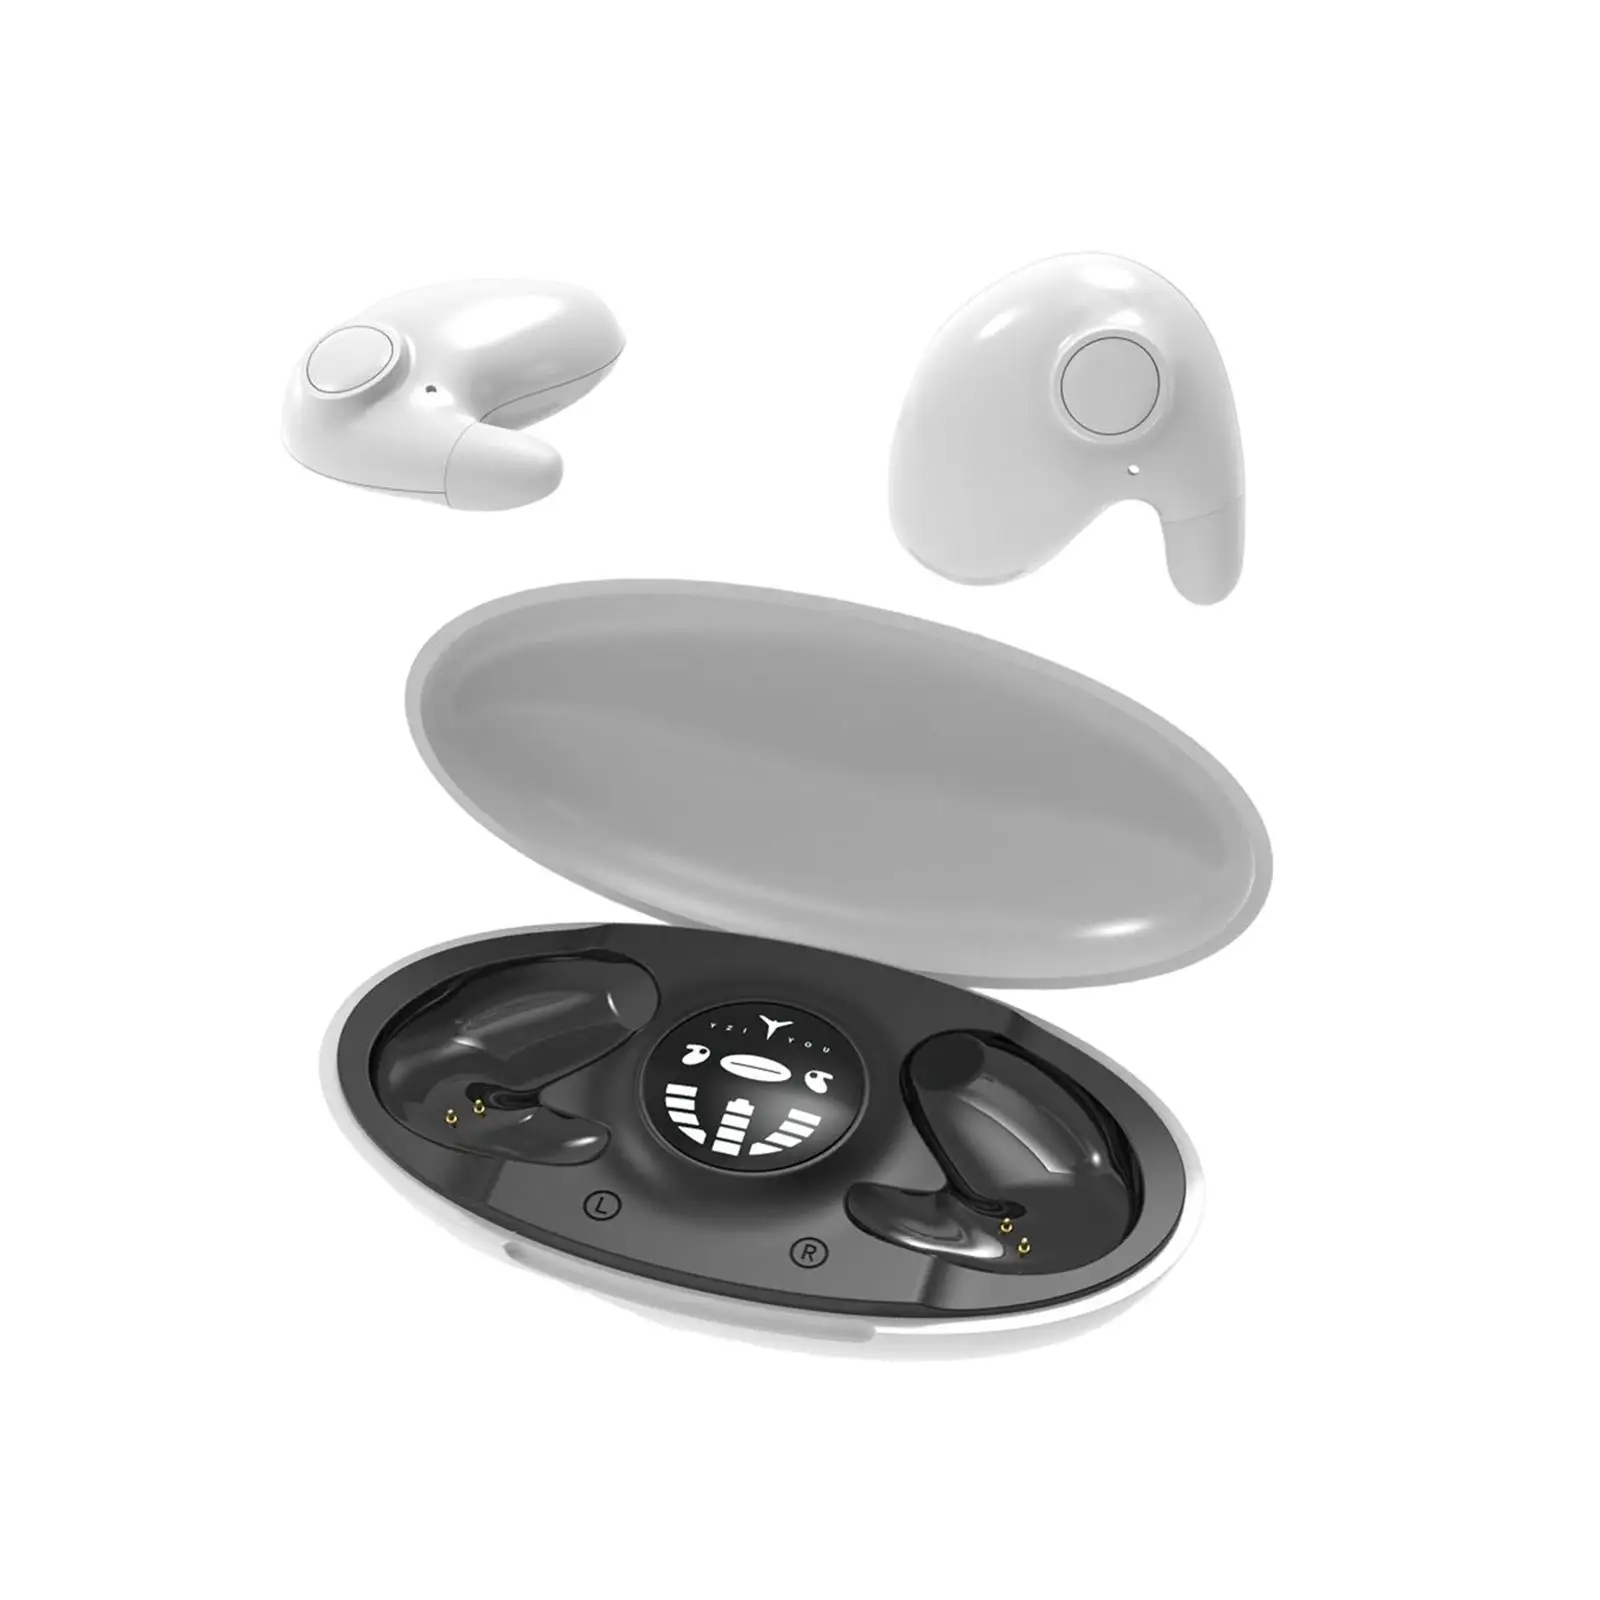 Wireless Earbuds Build in Microphone HiFi Stereo HD Call with Charging Case IPX5 Waterproof Earpiece V5.3 Headphones for Driving